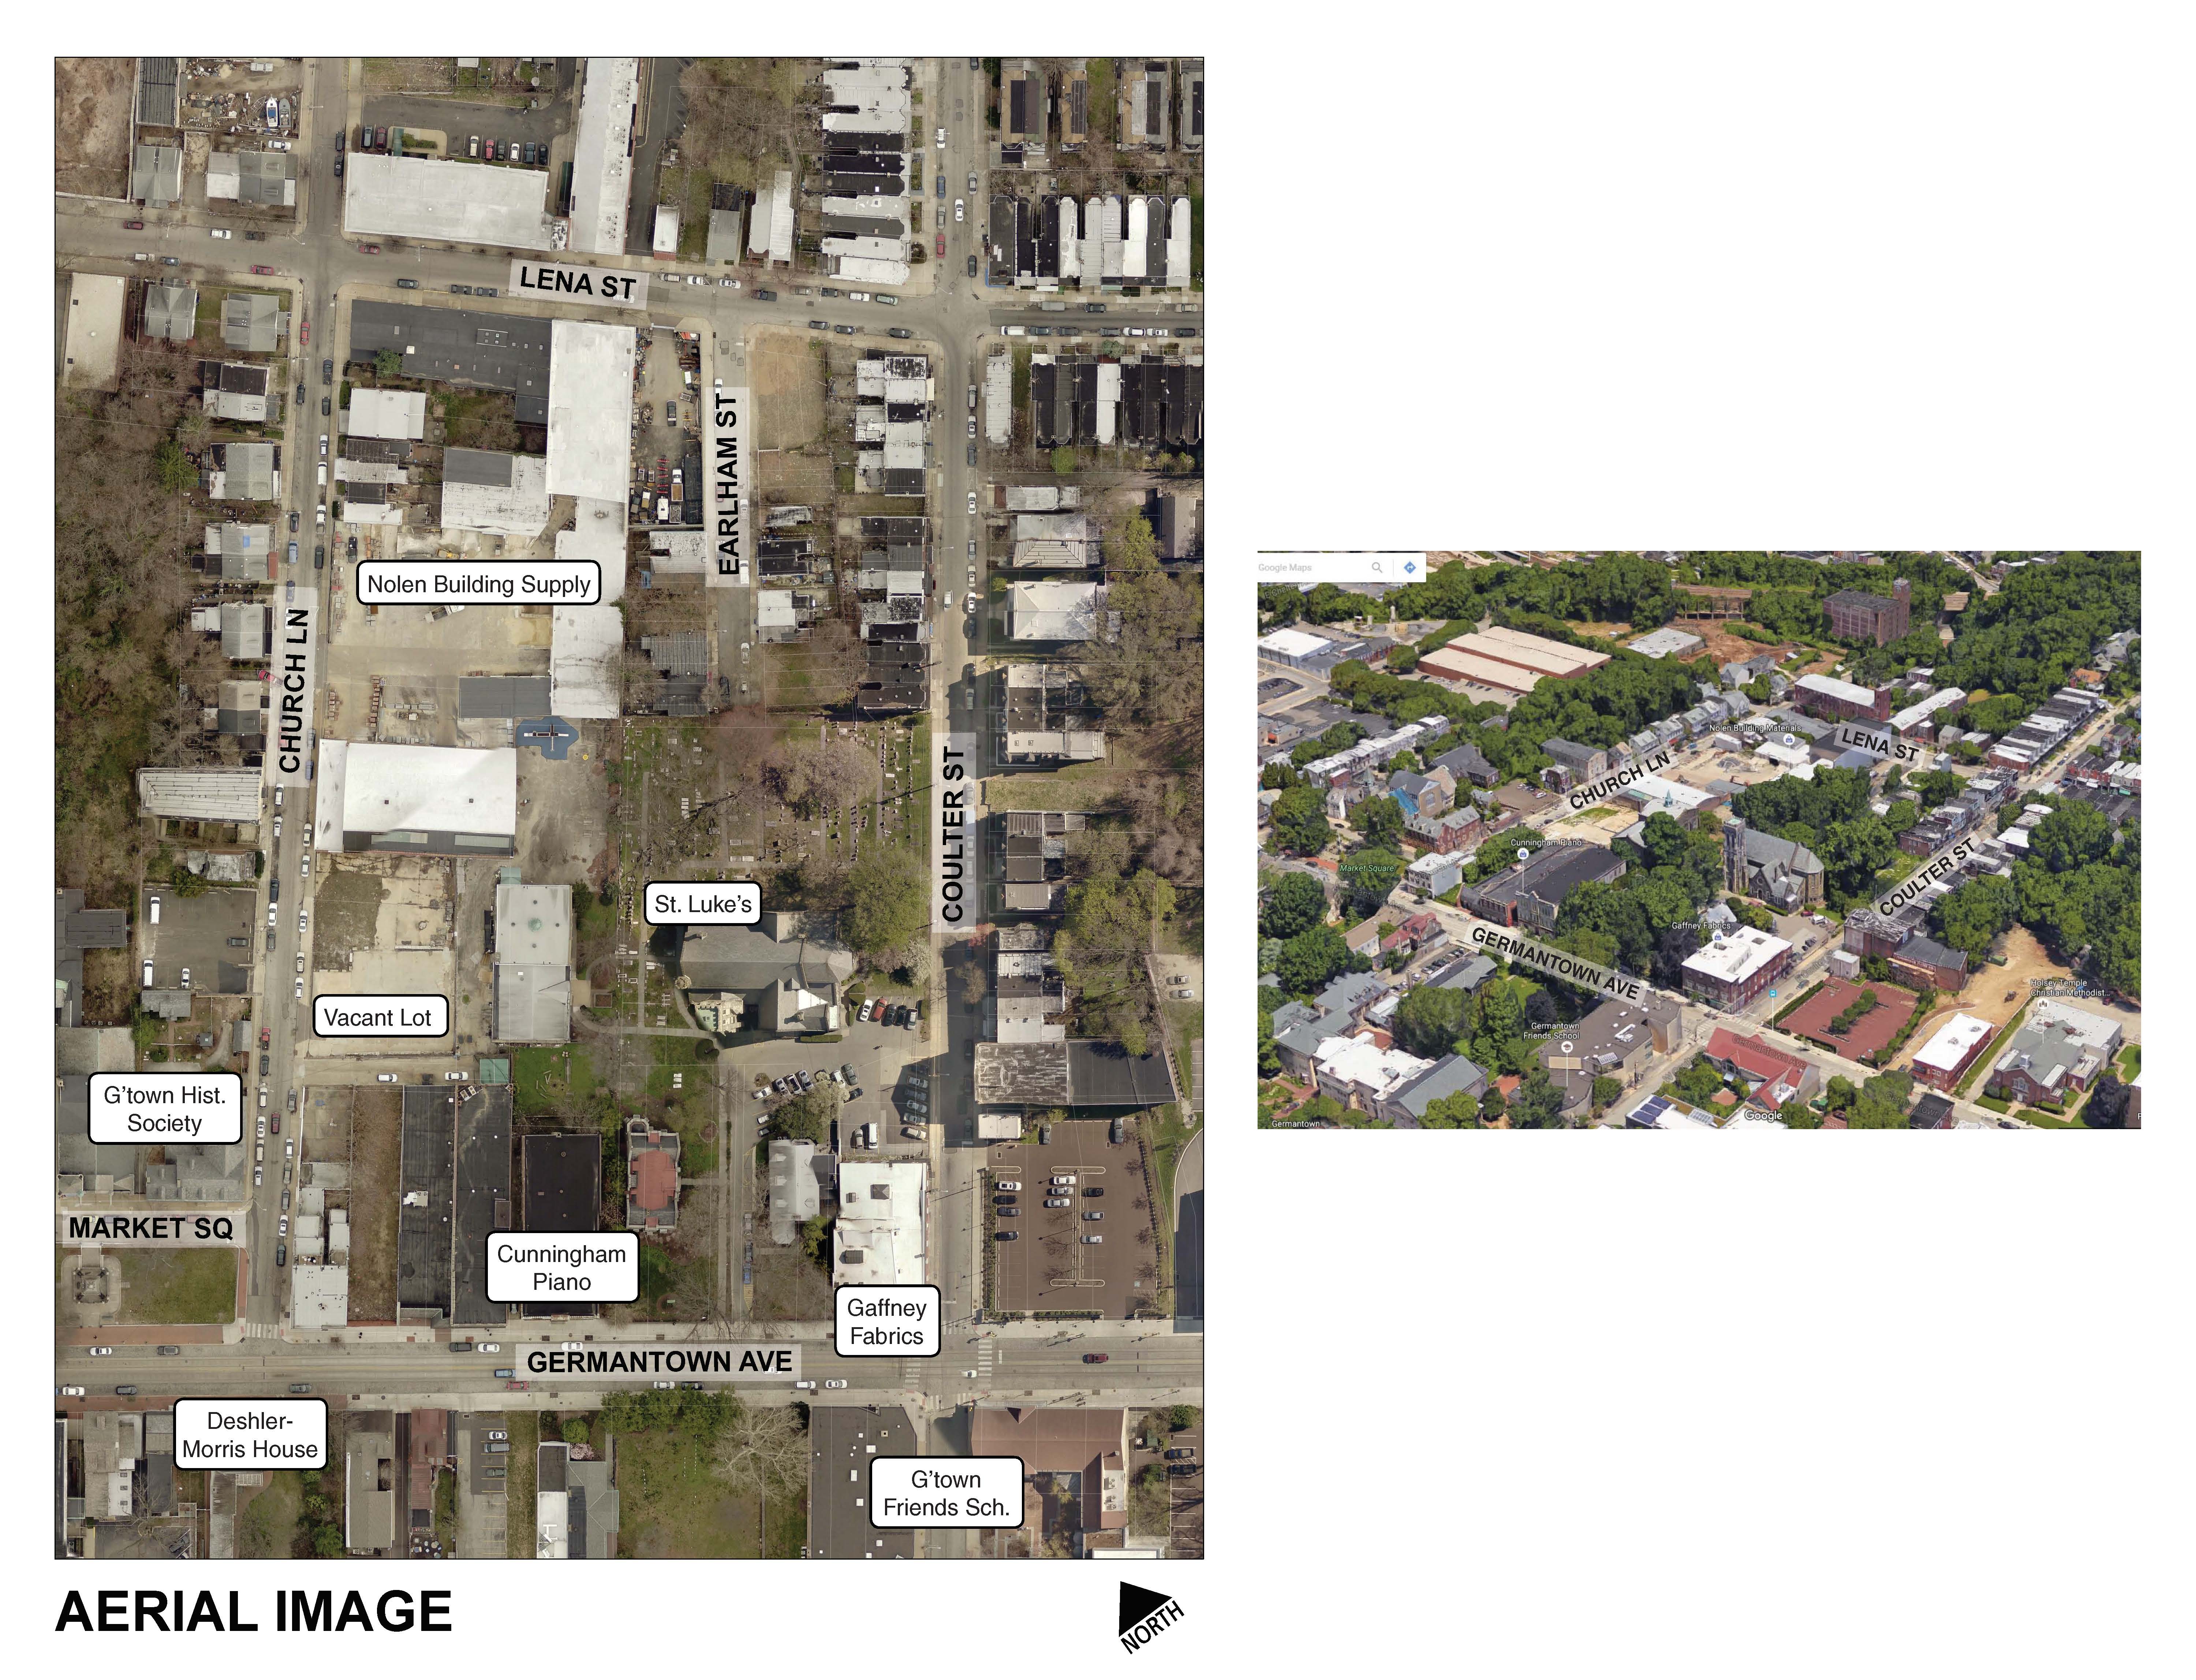 54xx Block of Germantown Ave - Existing - Aerial (Sept. 2016)